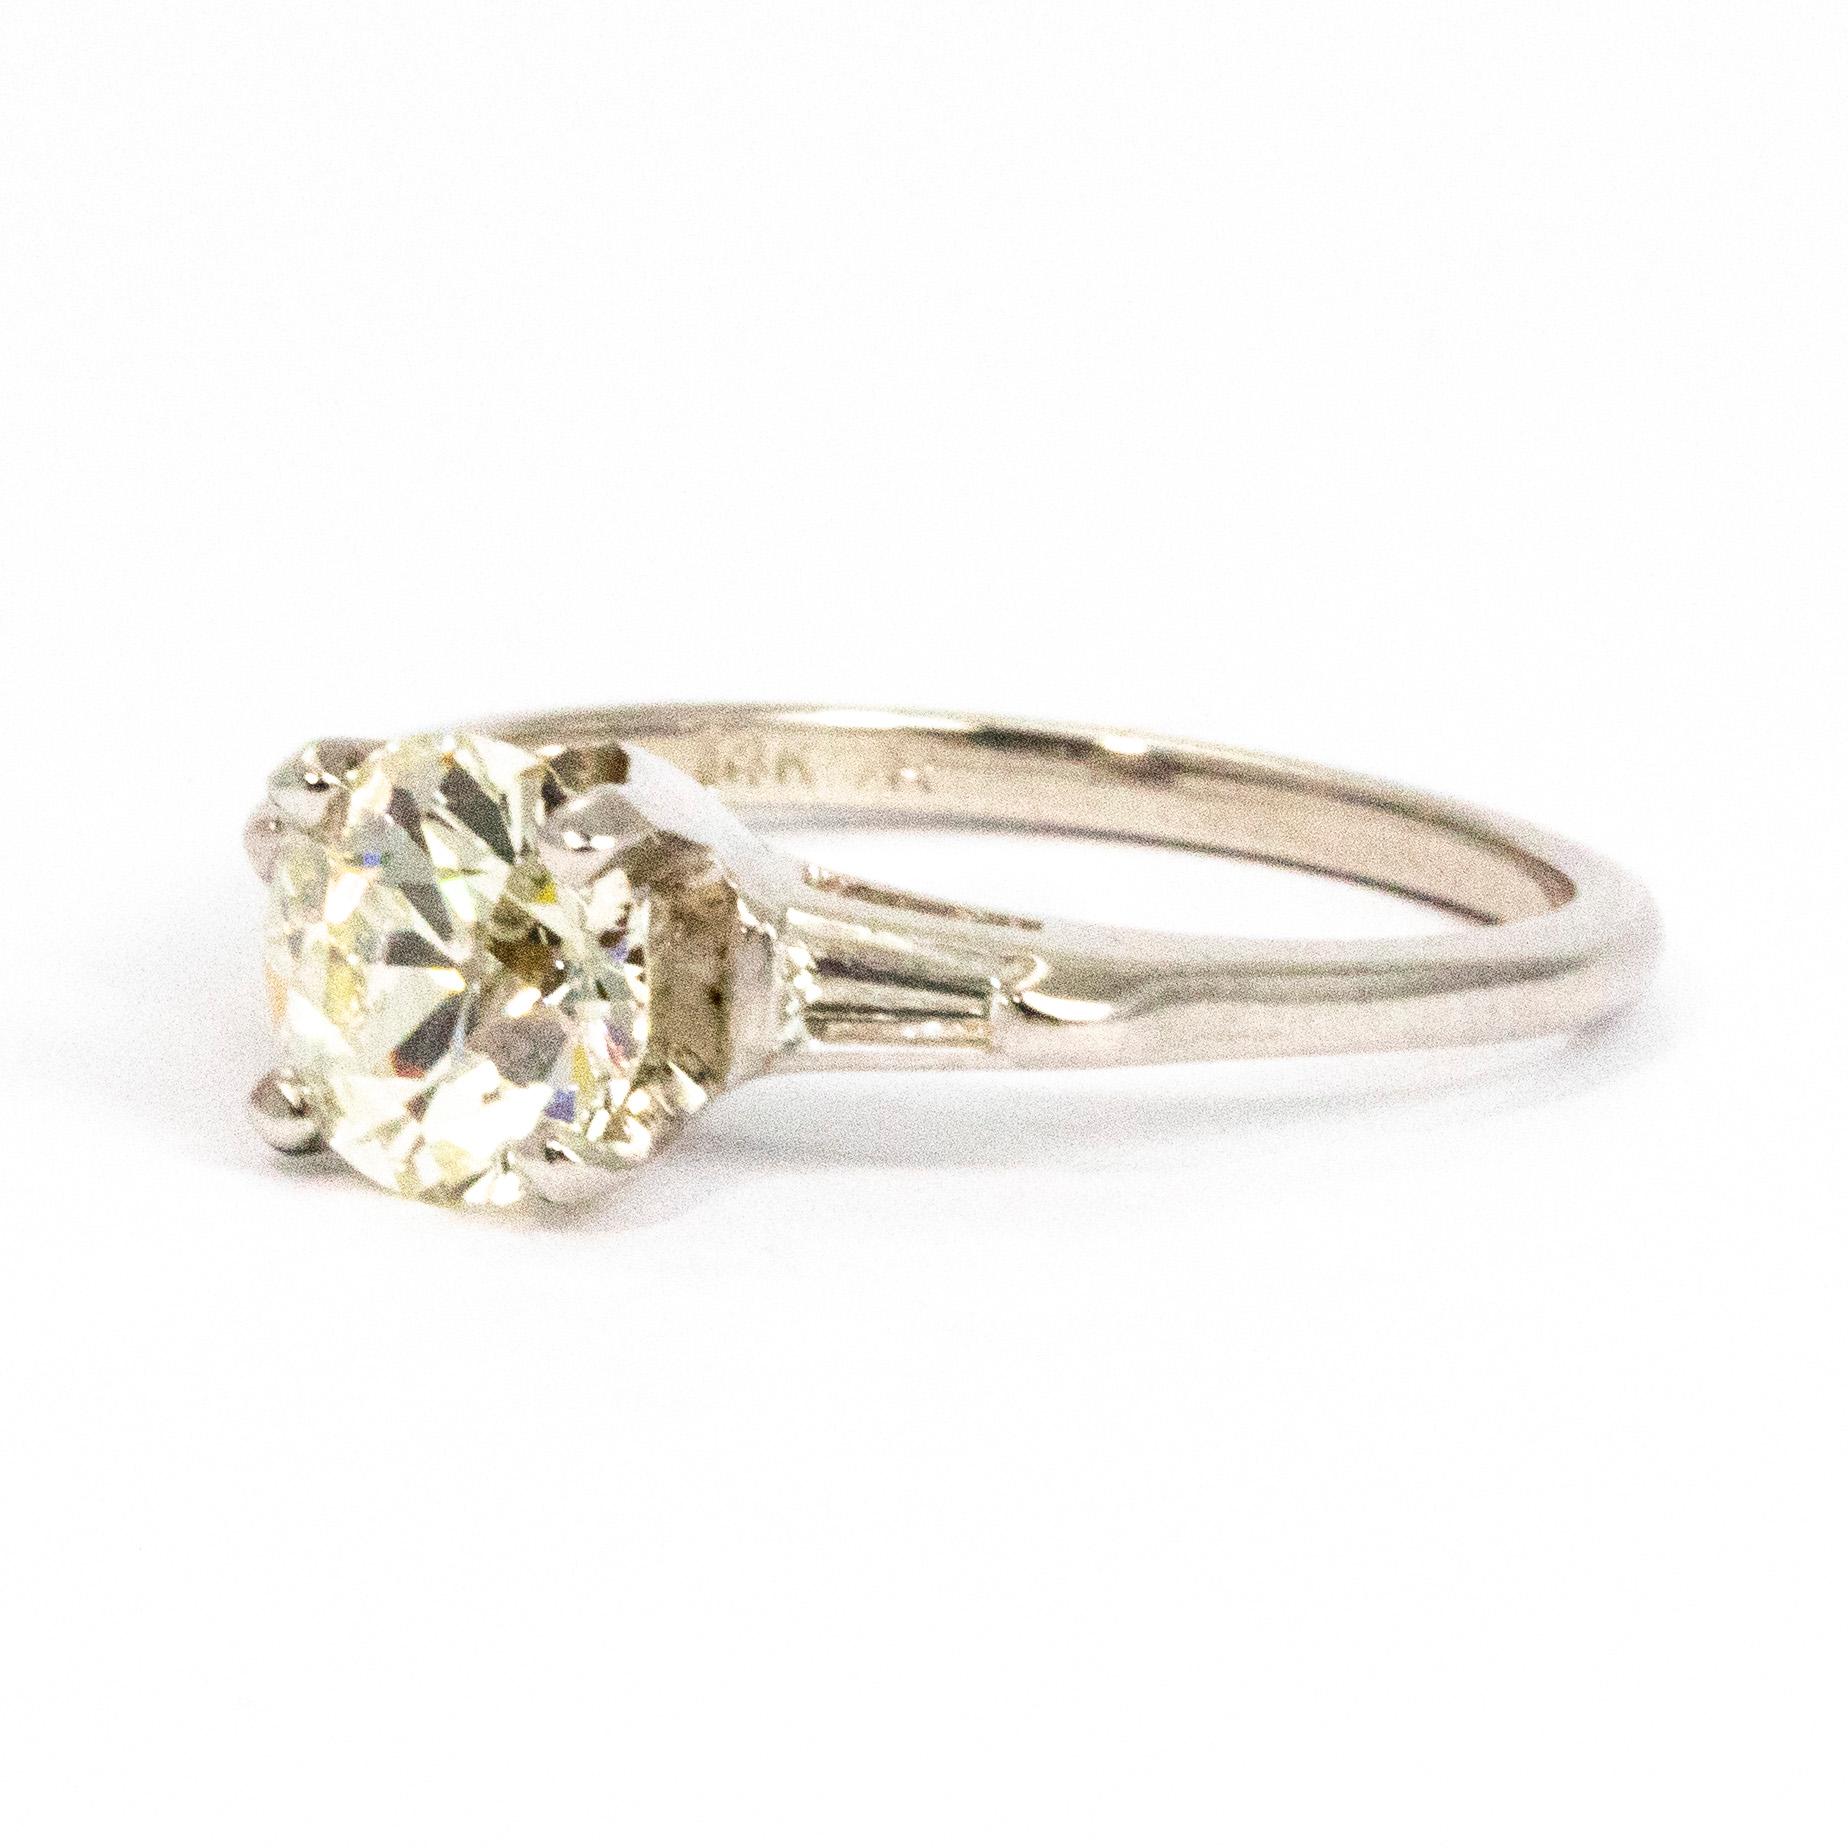 Gorgeous baguette diamonds sit on the shoulders of this absolutely stunning ring. The centre stone is a wonderful K colour and measures 1.35carat. It is a gorgeous size and has a lovely sparkle to it. Modelled in white gold.

Ring Size: N or 6 3/4